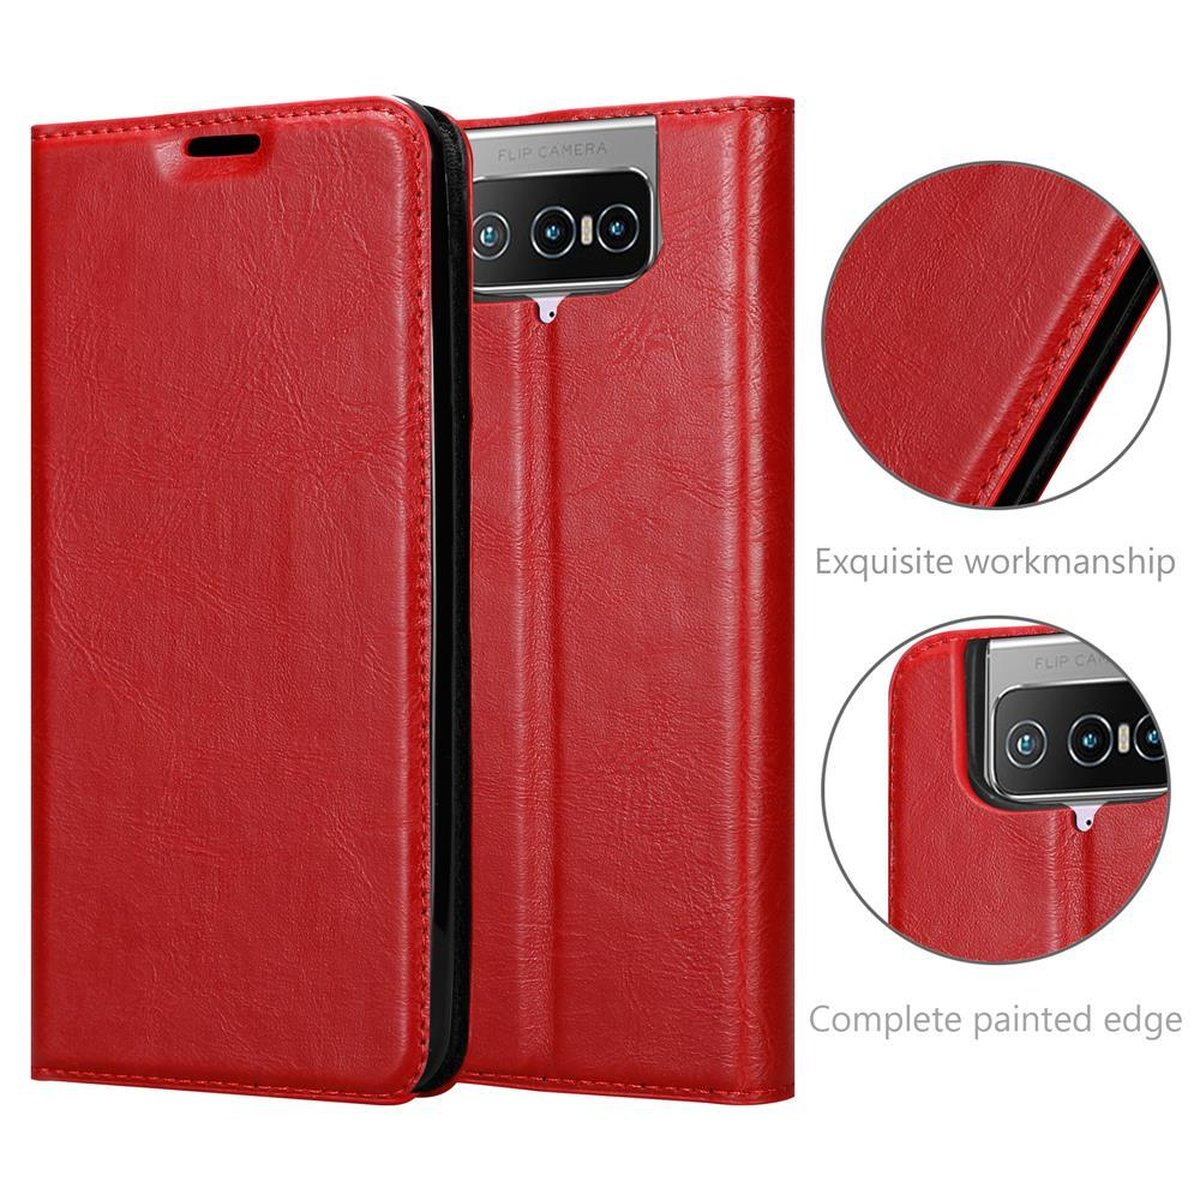 CADORABO Book Hülle Invisible Magnet, Asus, ZenFone Bookcover, ROT APFEL 7